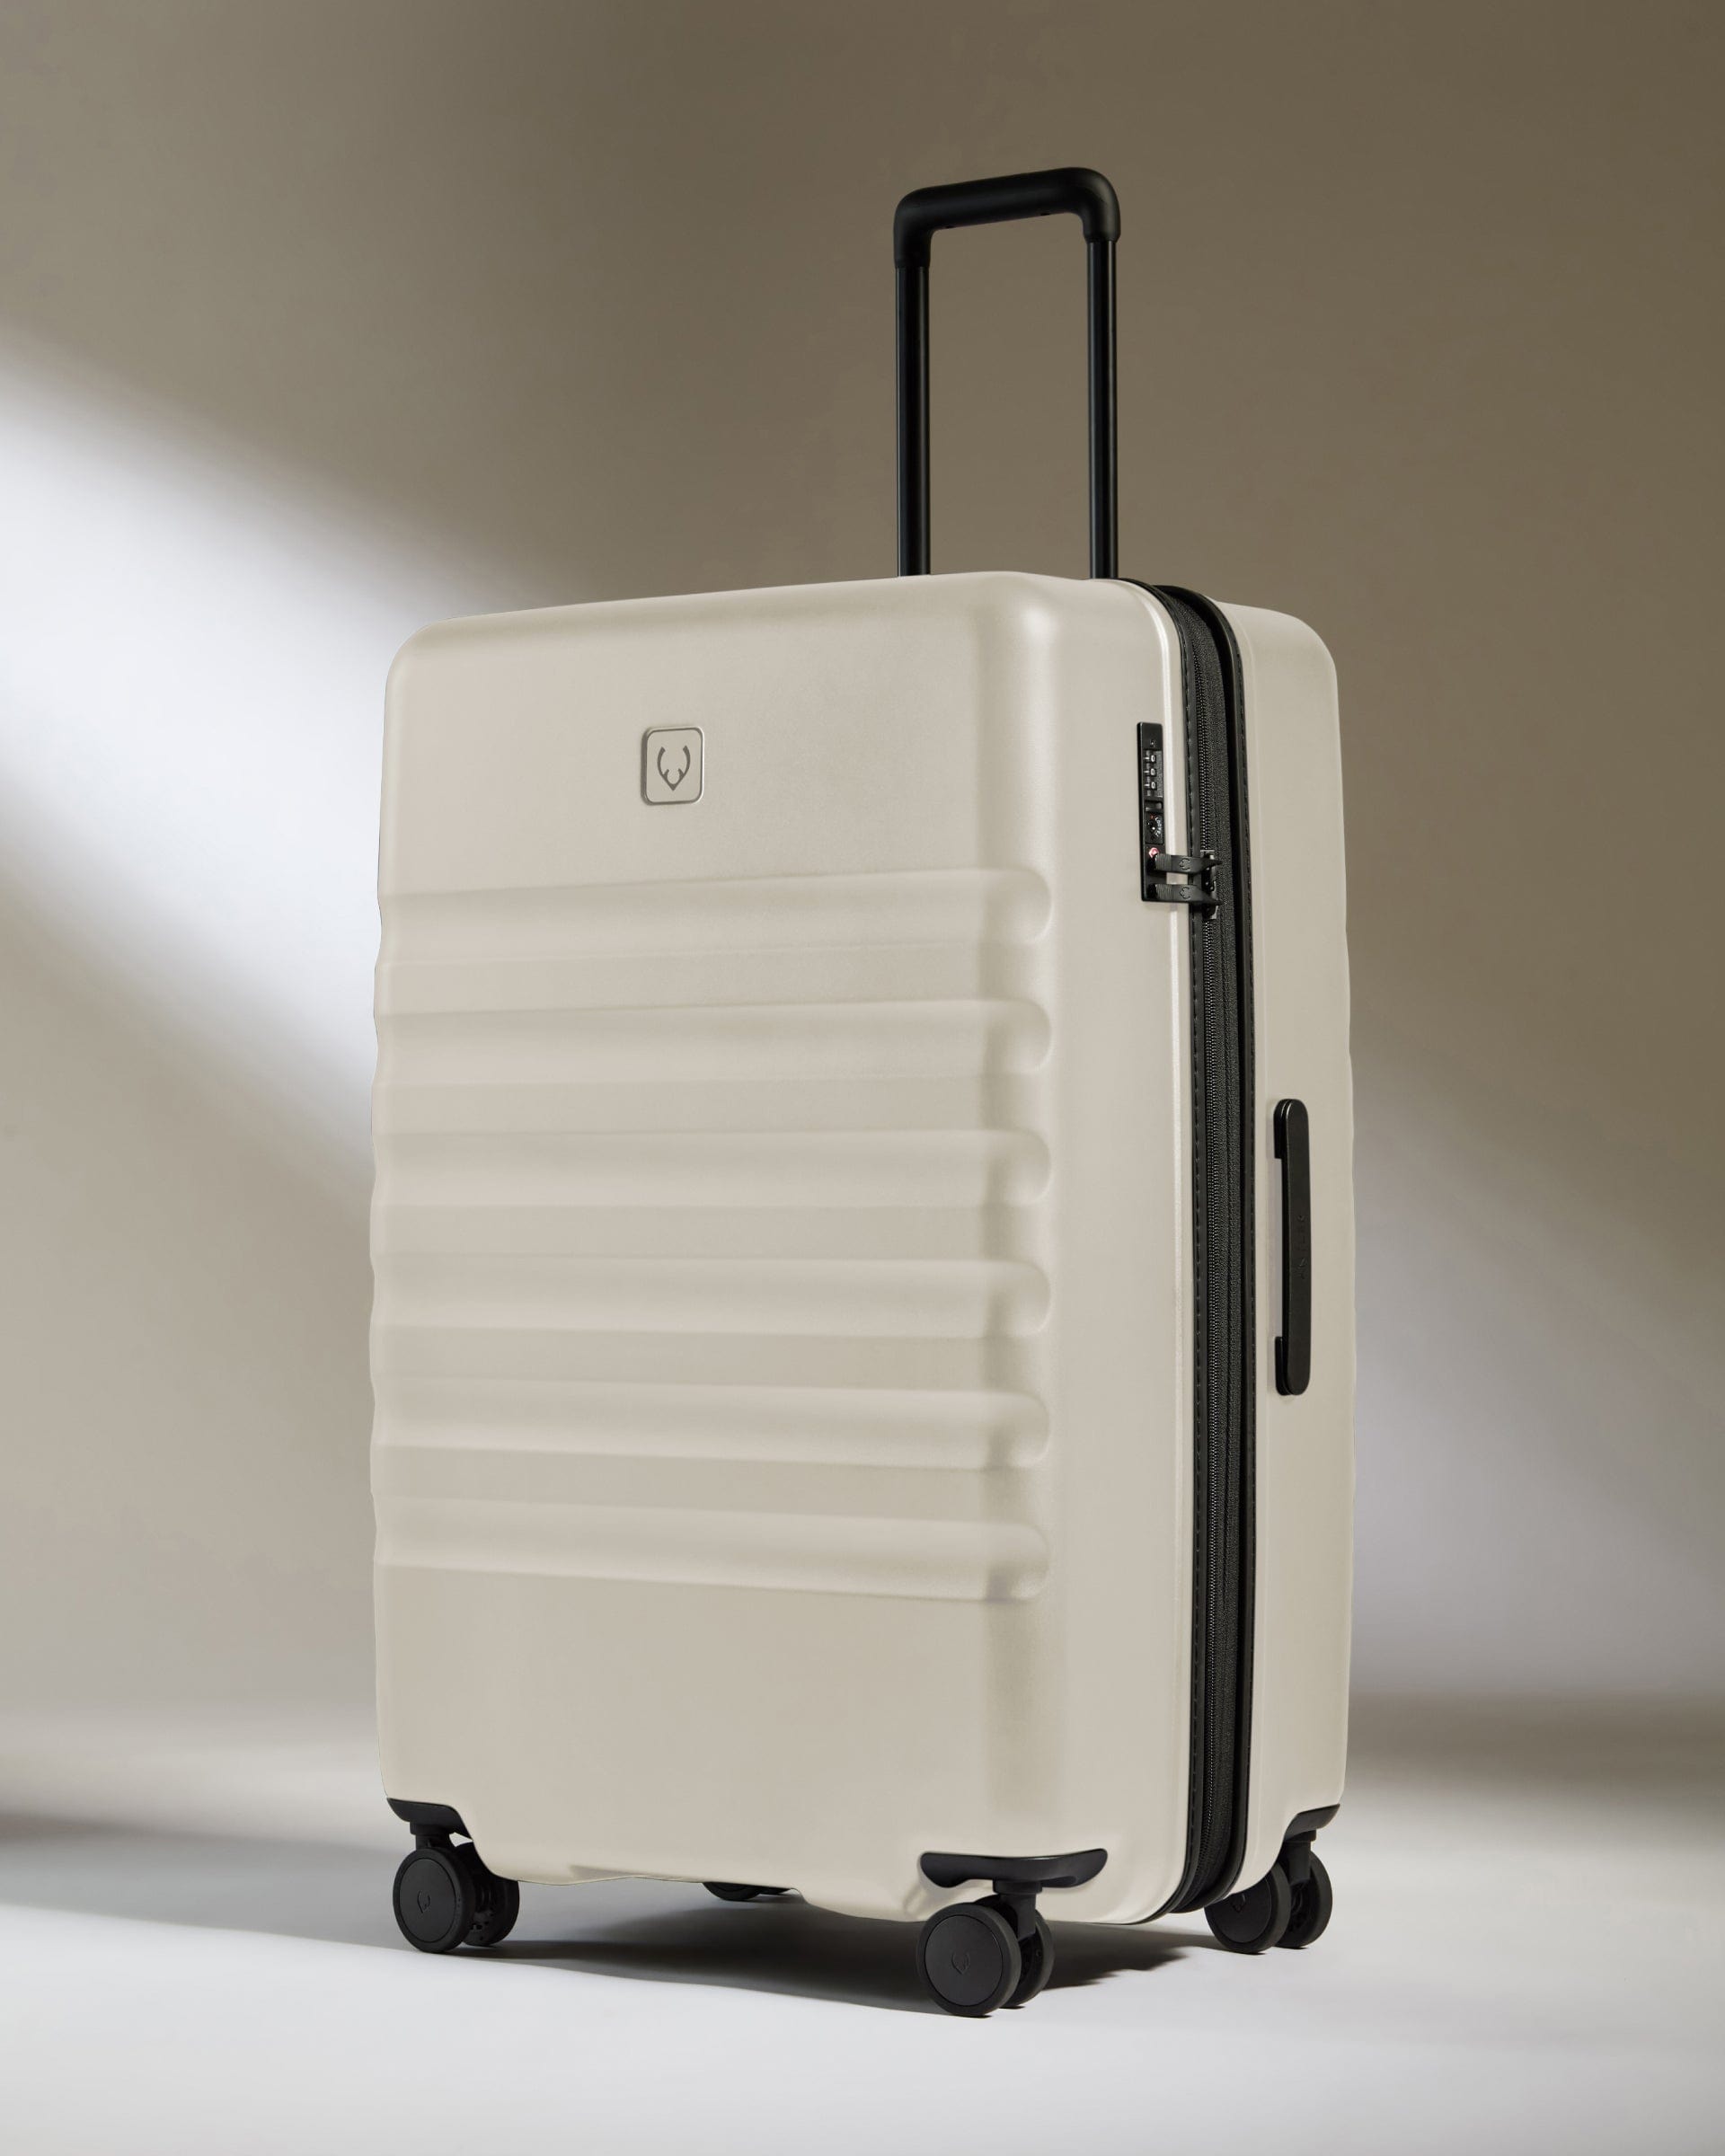 View Antler Icon Stripe Large Suitcase In Taupe Size 336cm x 78cm x 517cm information